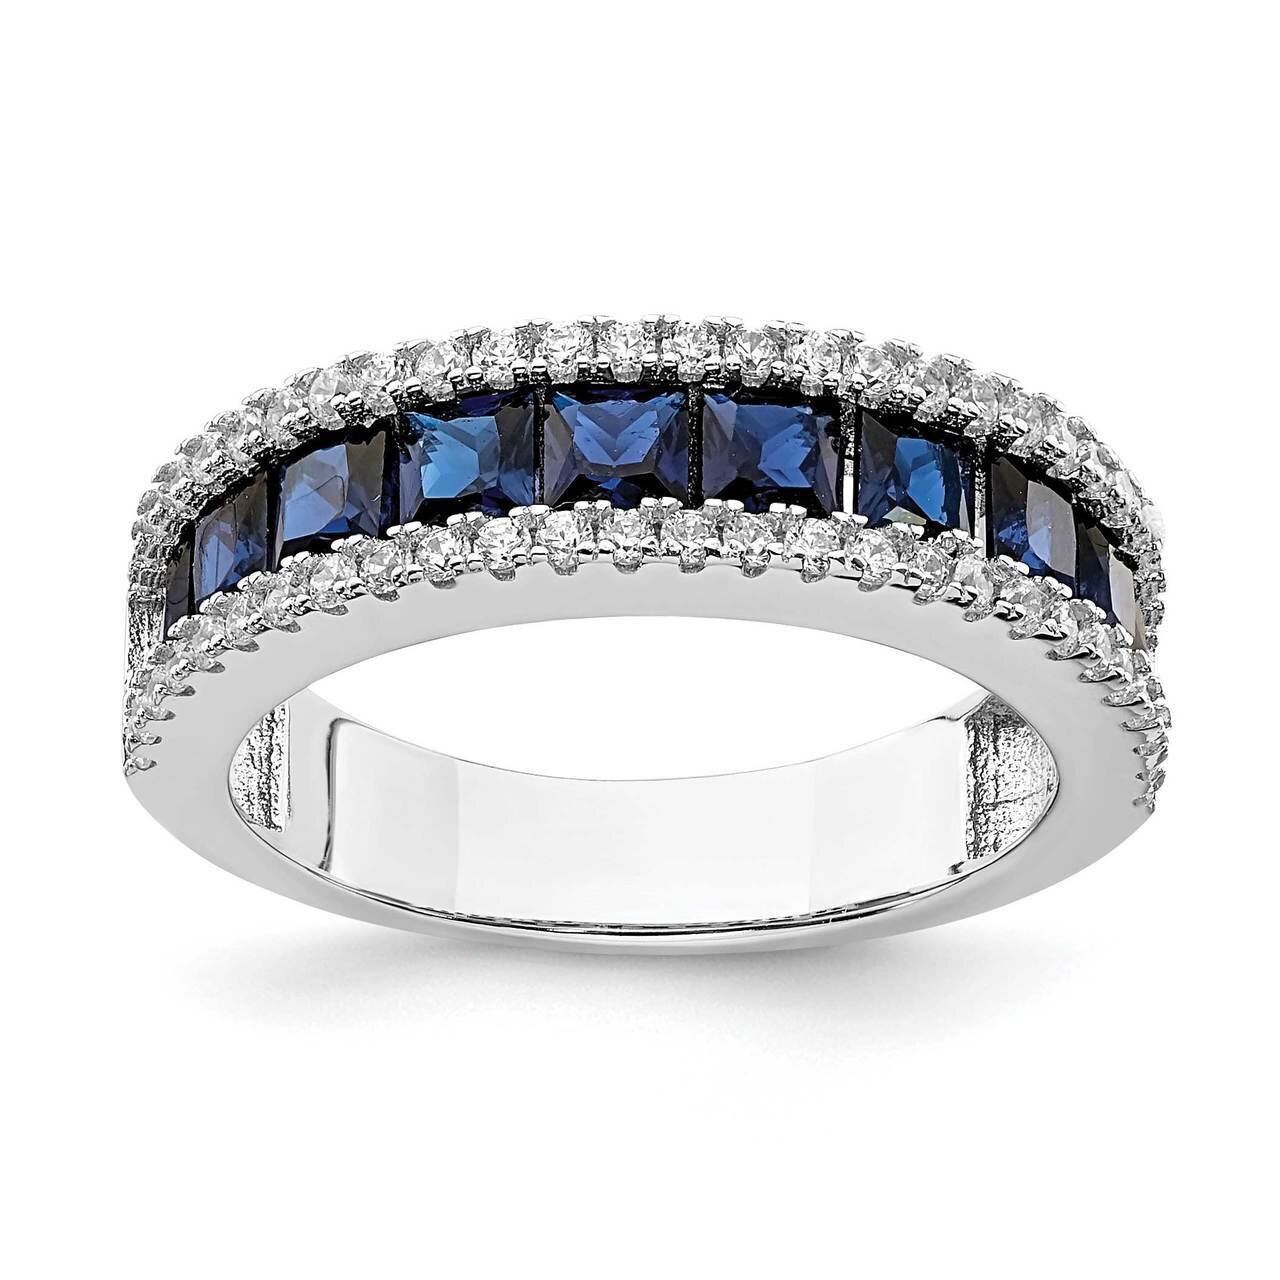 Synthetic Blue Spinel & CZ Diamond Ring Sterling Silver Rhodium-plated QR7014